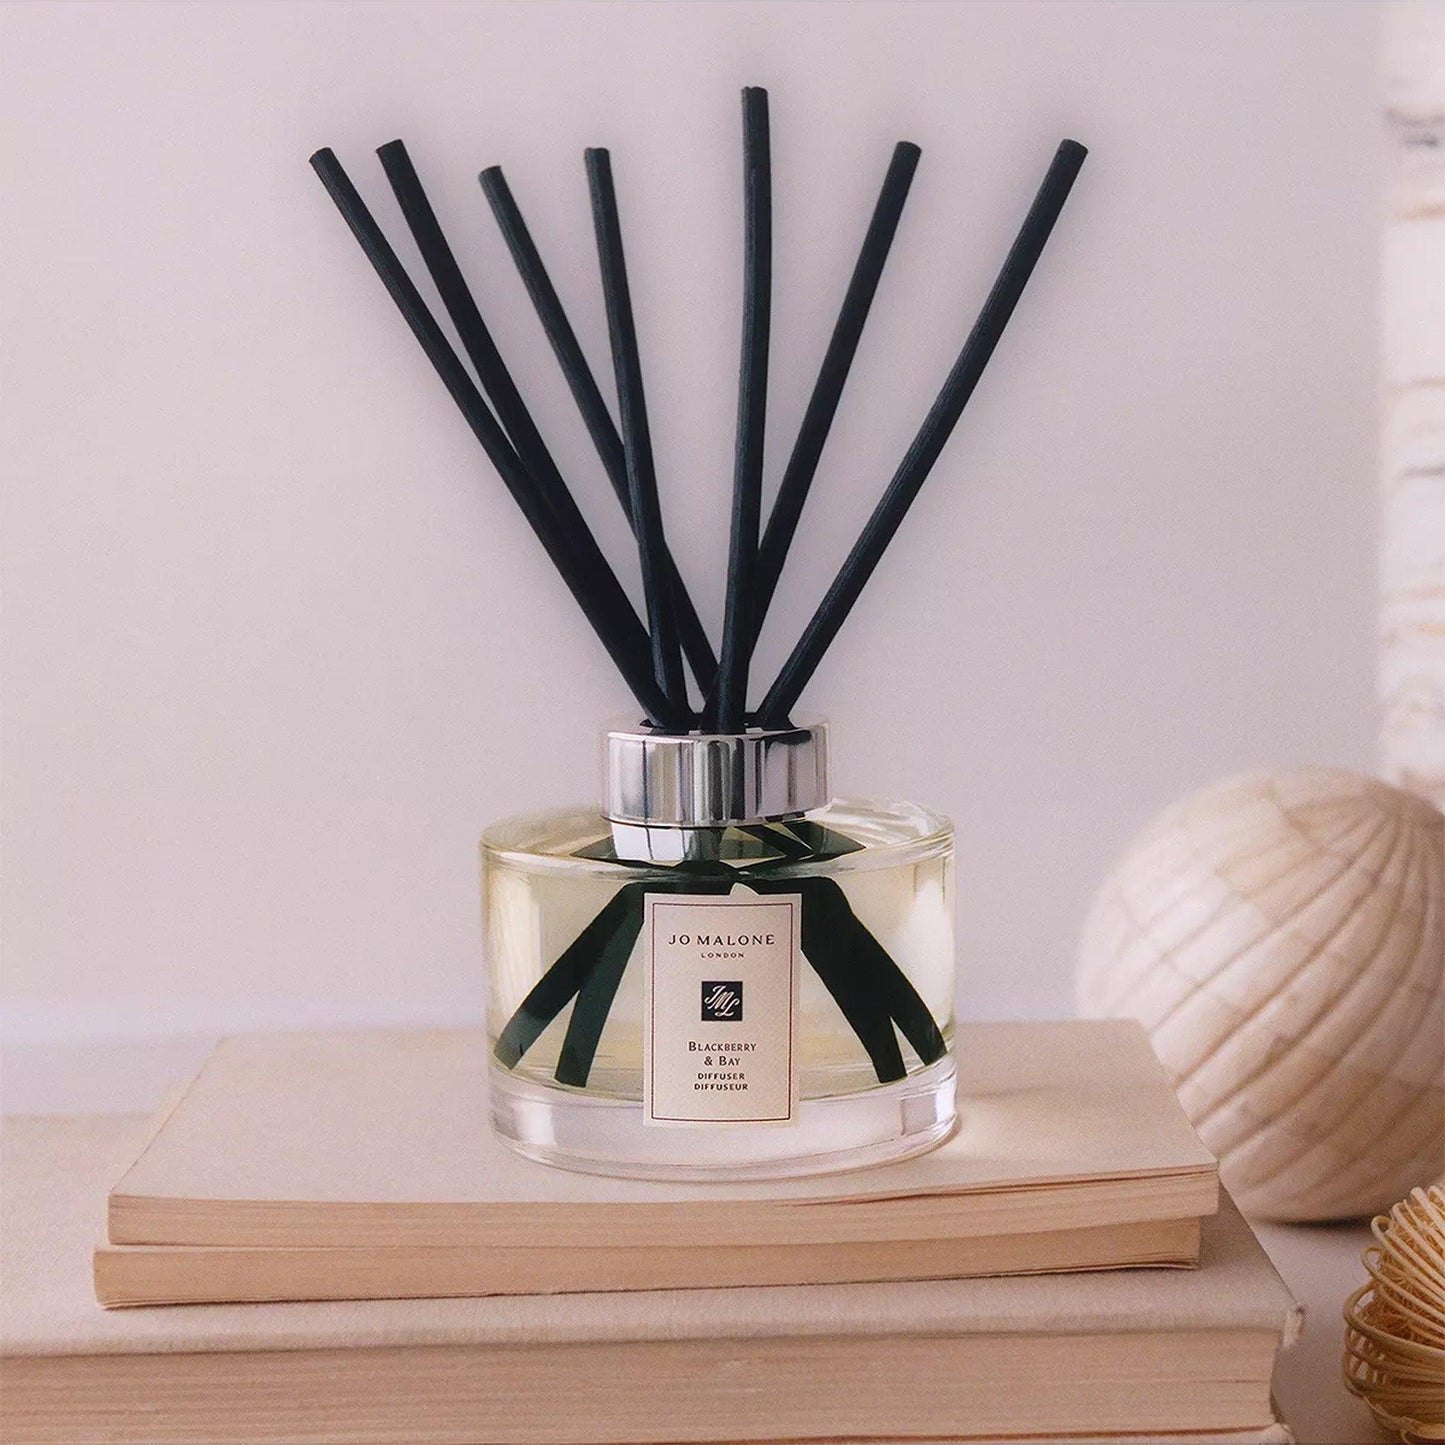 Blackberry & Bay Diffuser - Cosmos Boutique New Jersey